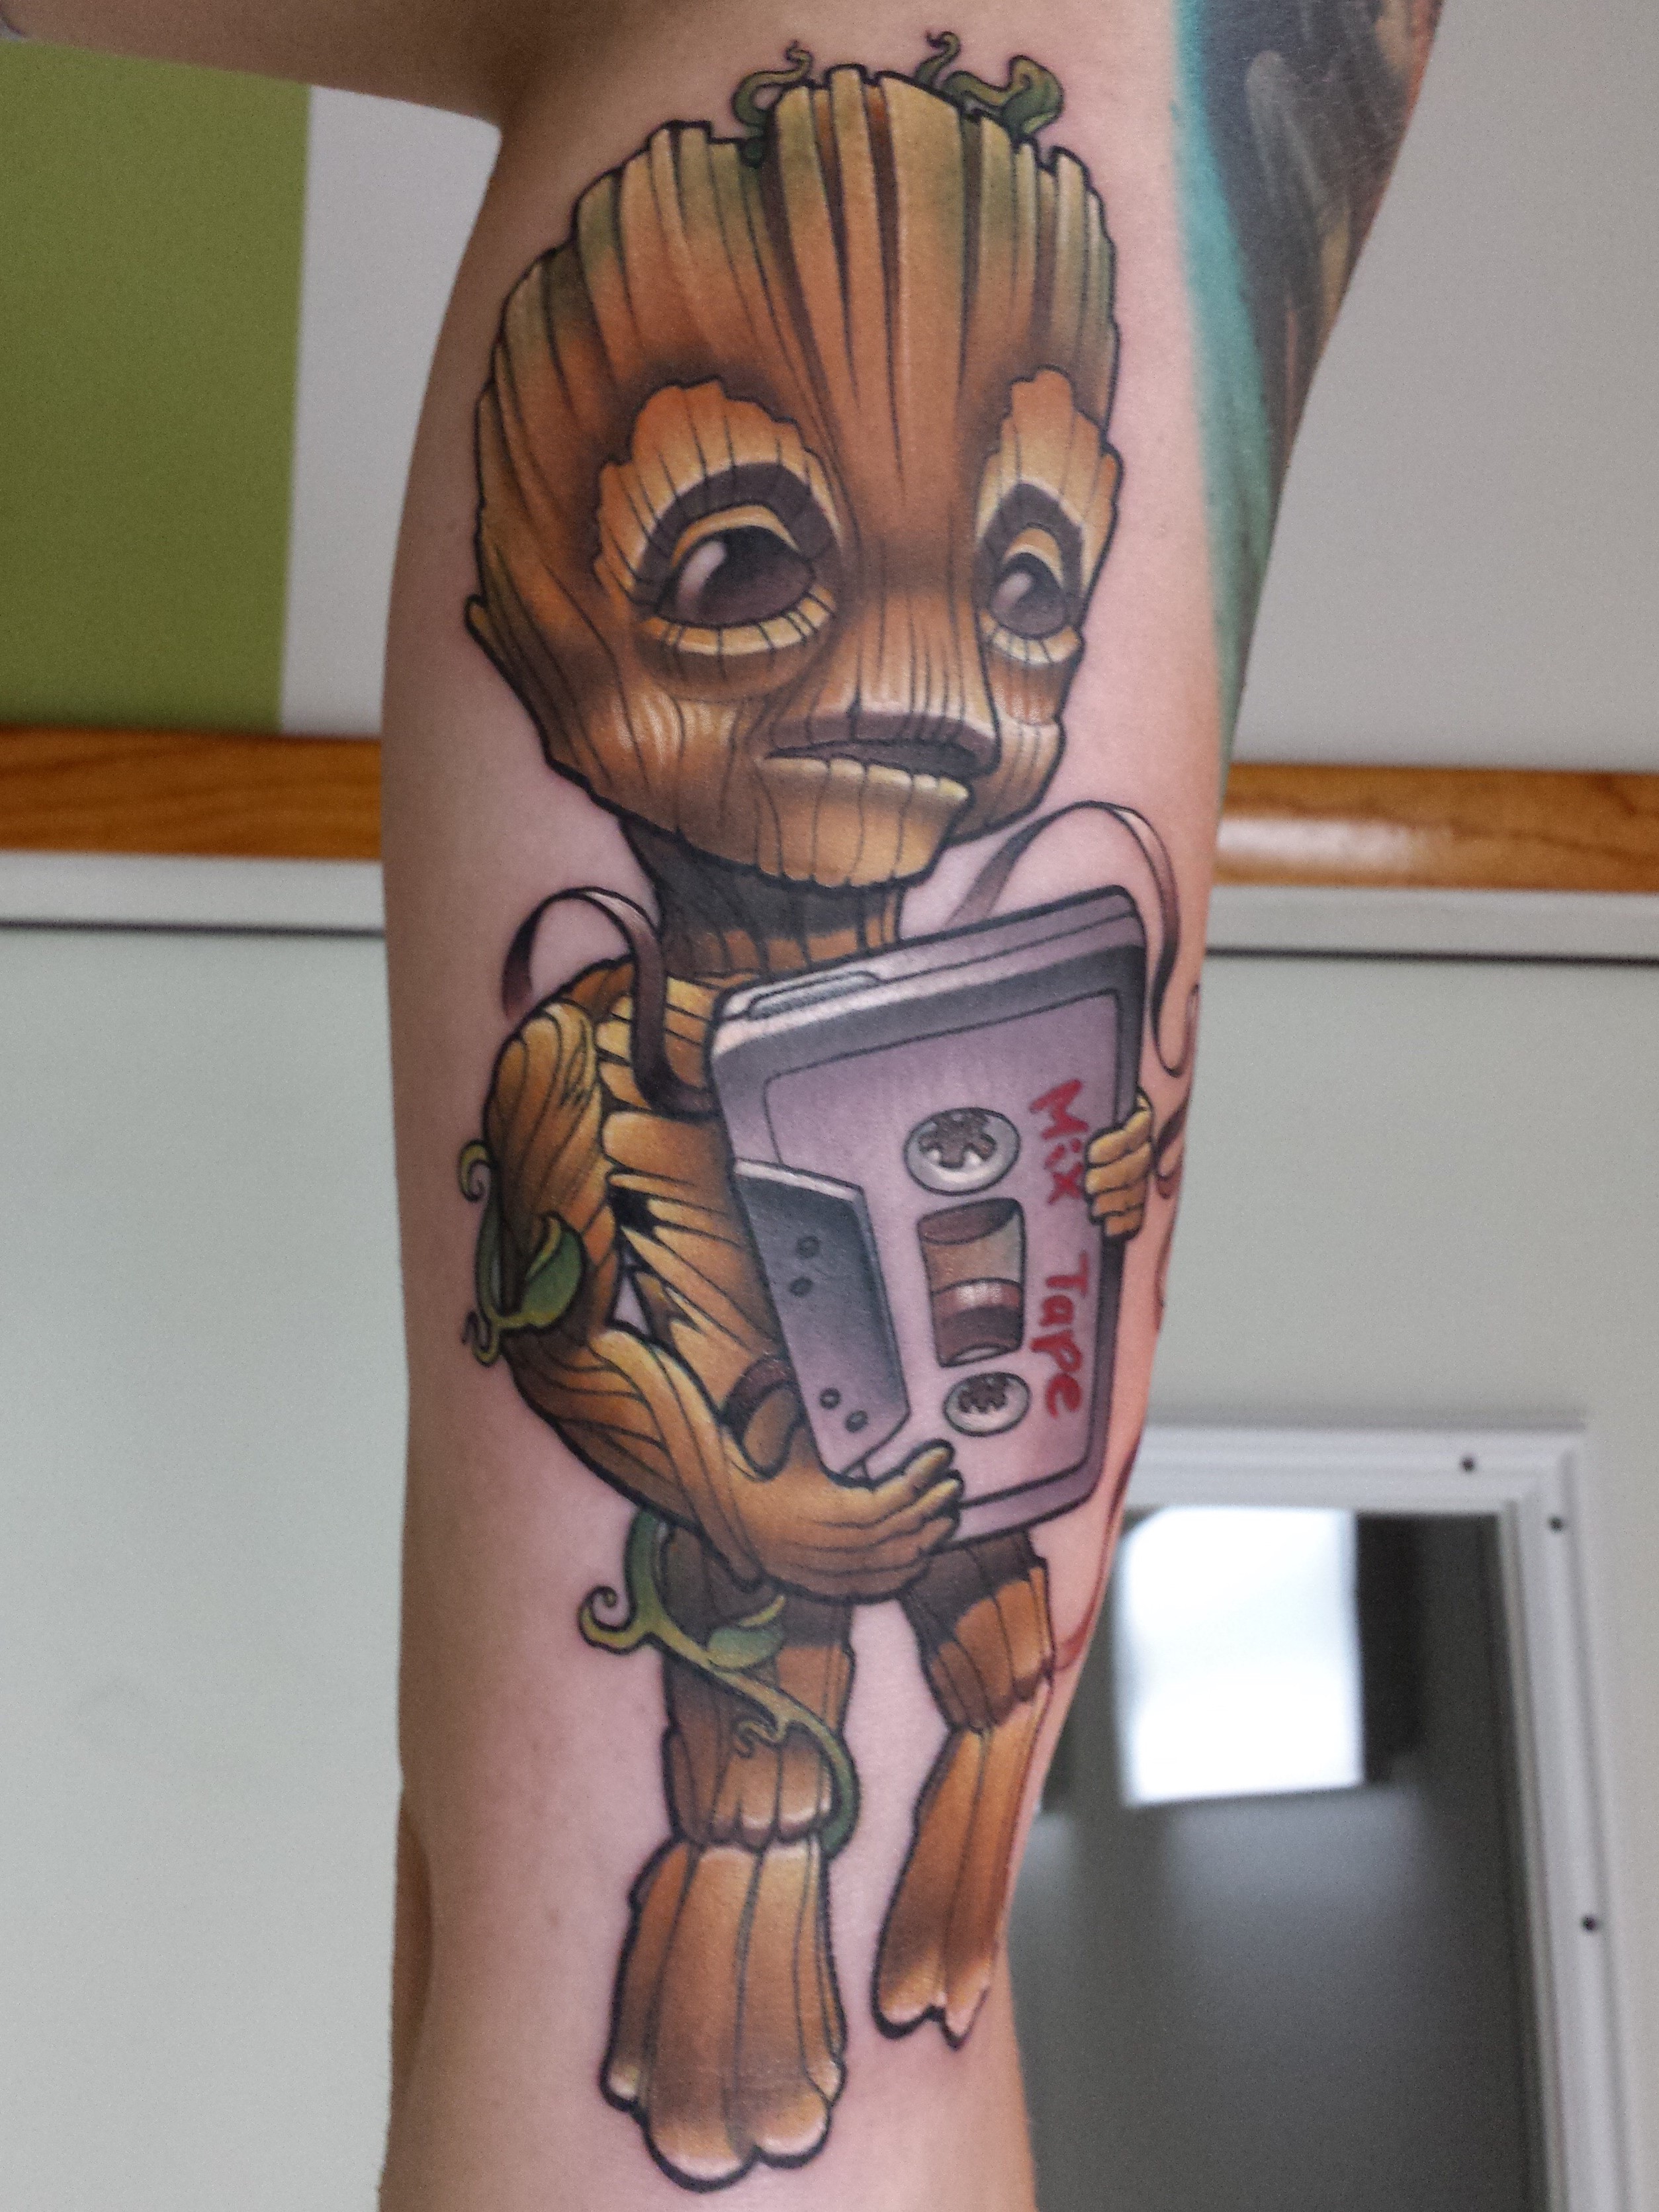 Baby Groot Tattoo done by Cracker Joe Swider in Connecticut